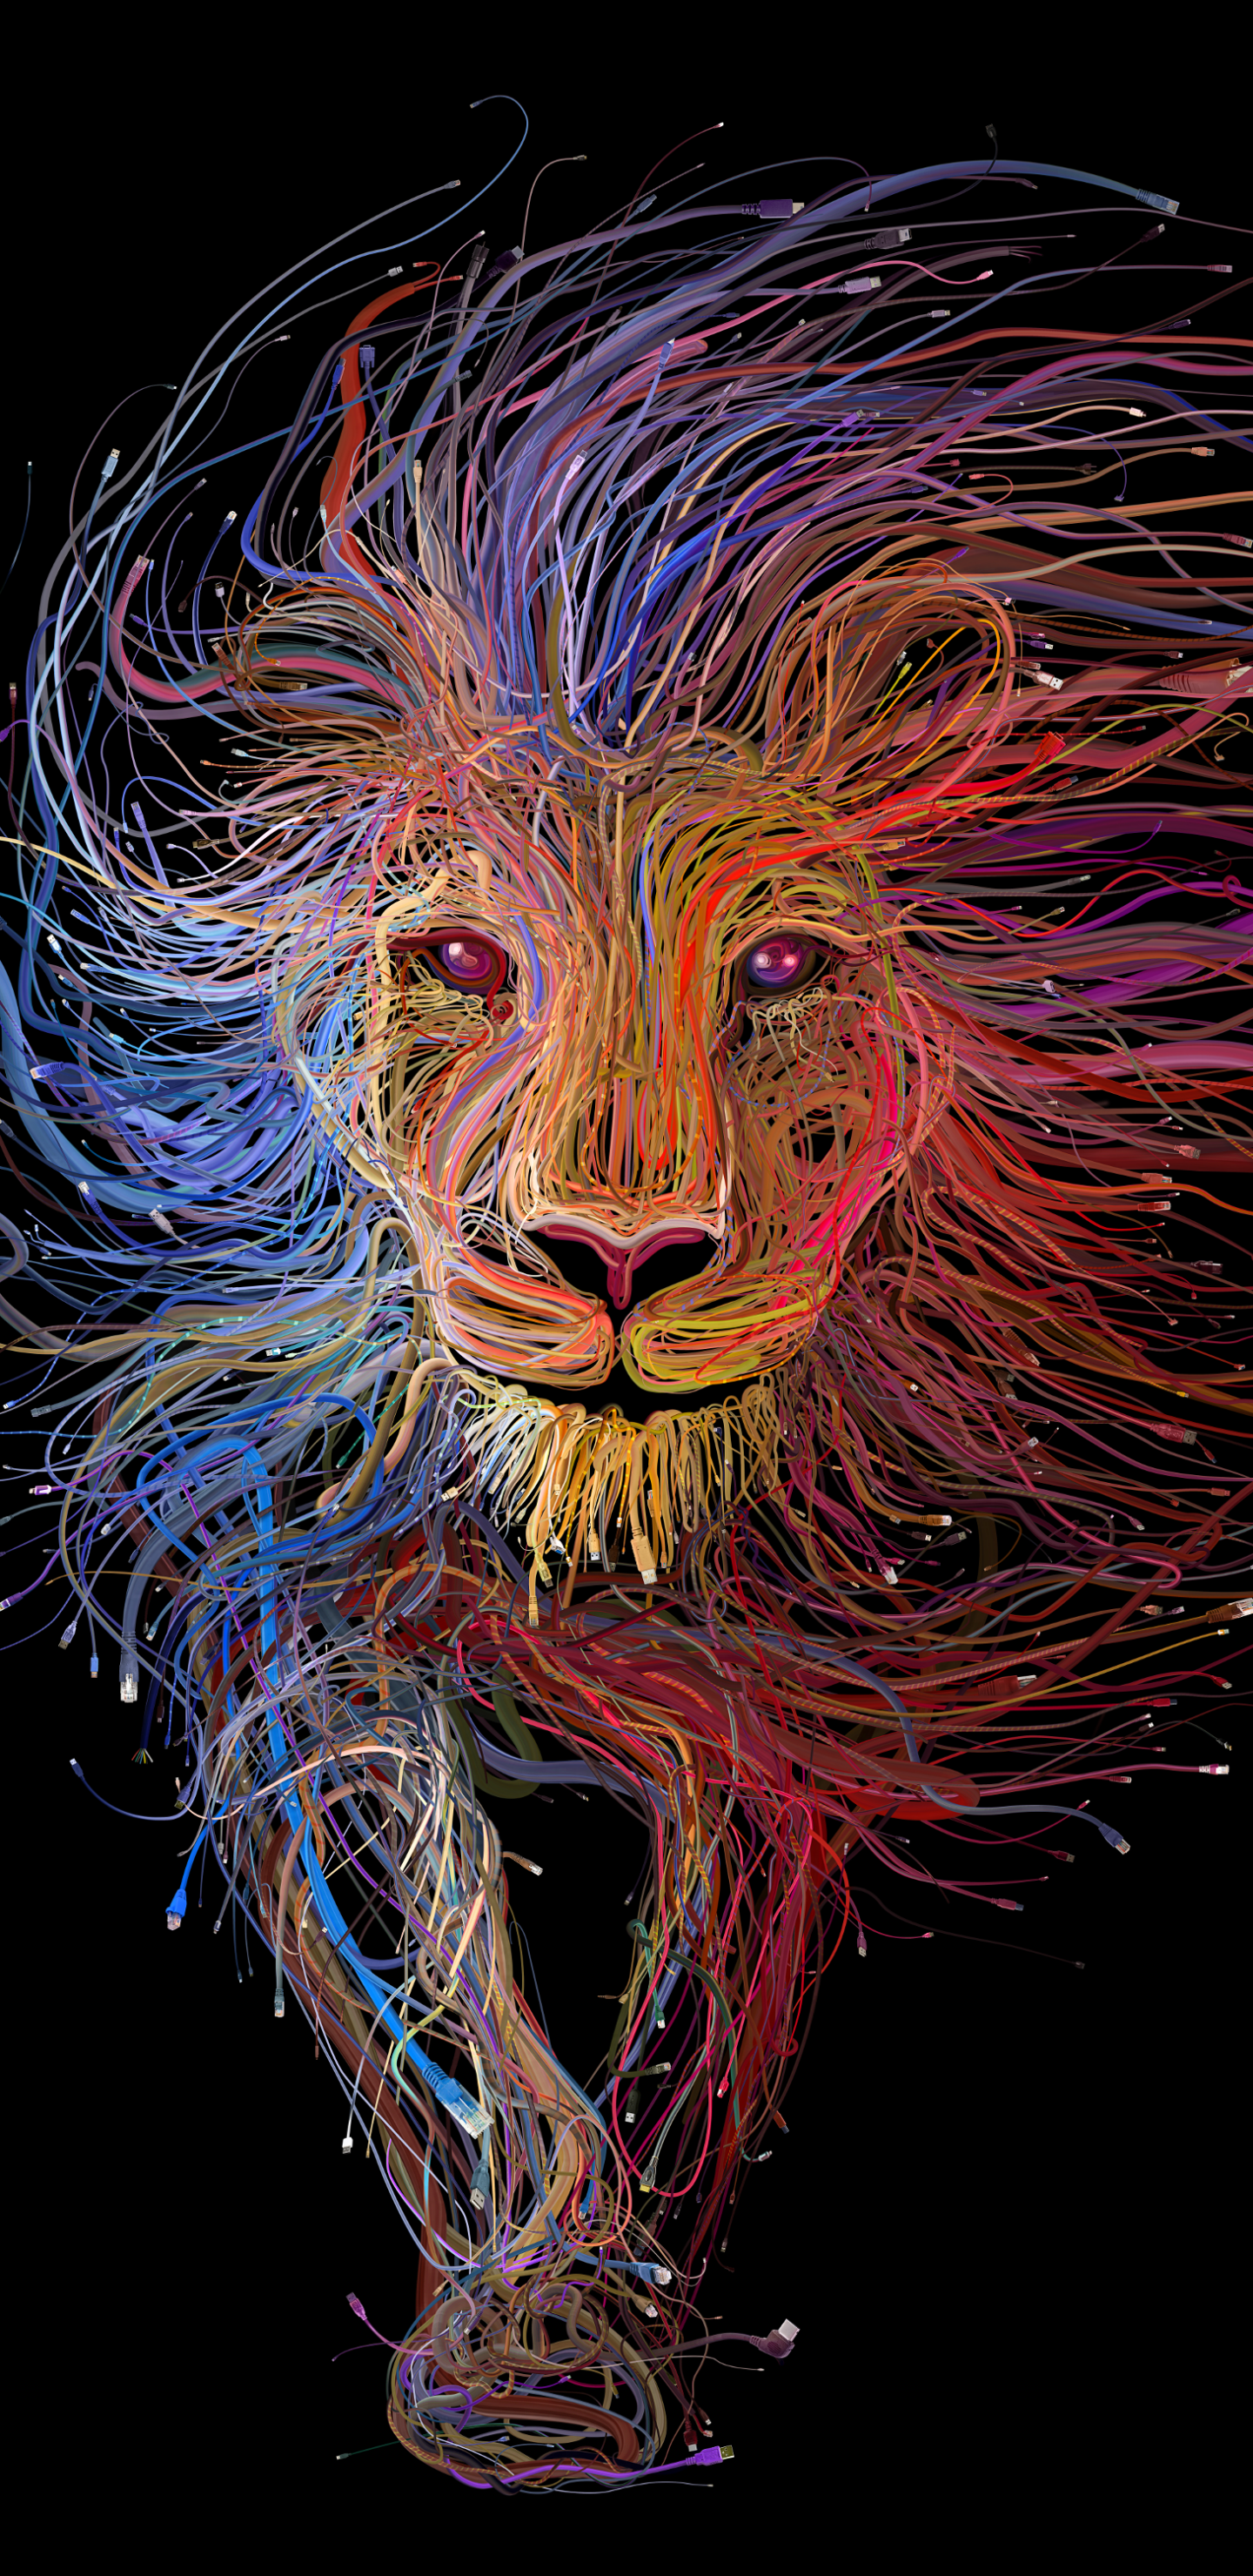 Colorful Lion by Charis Tsevis